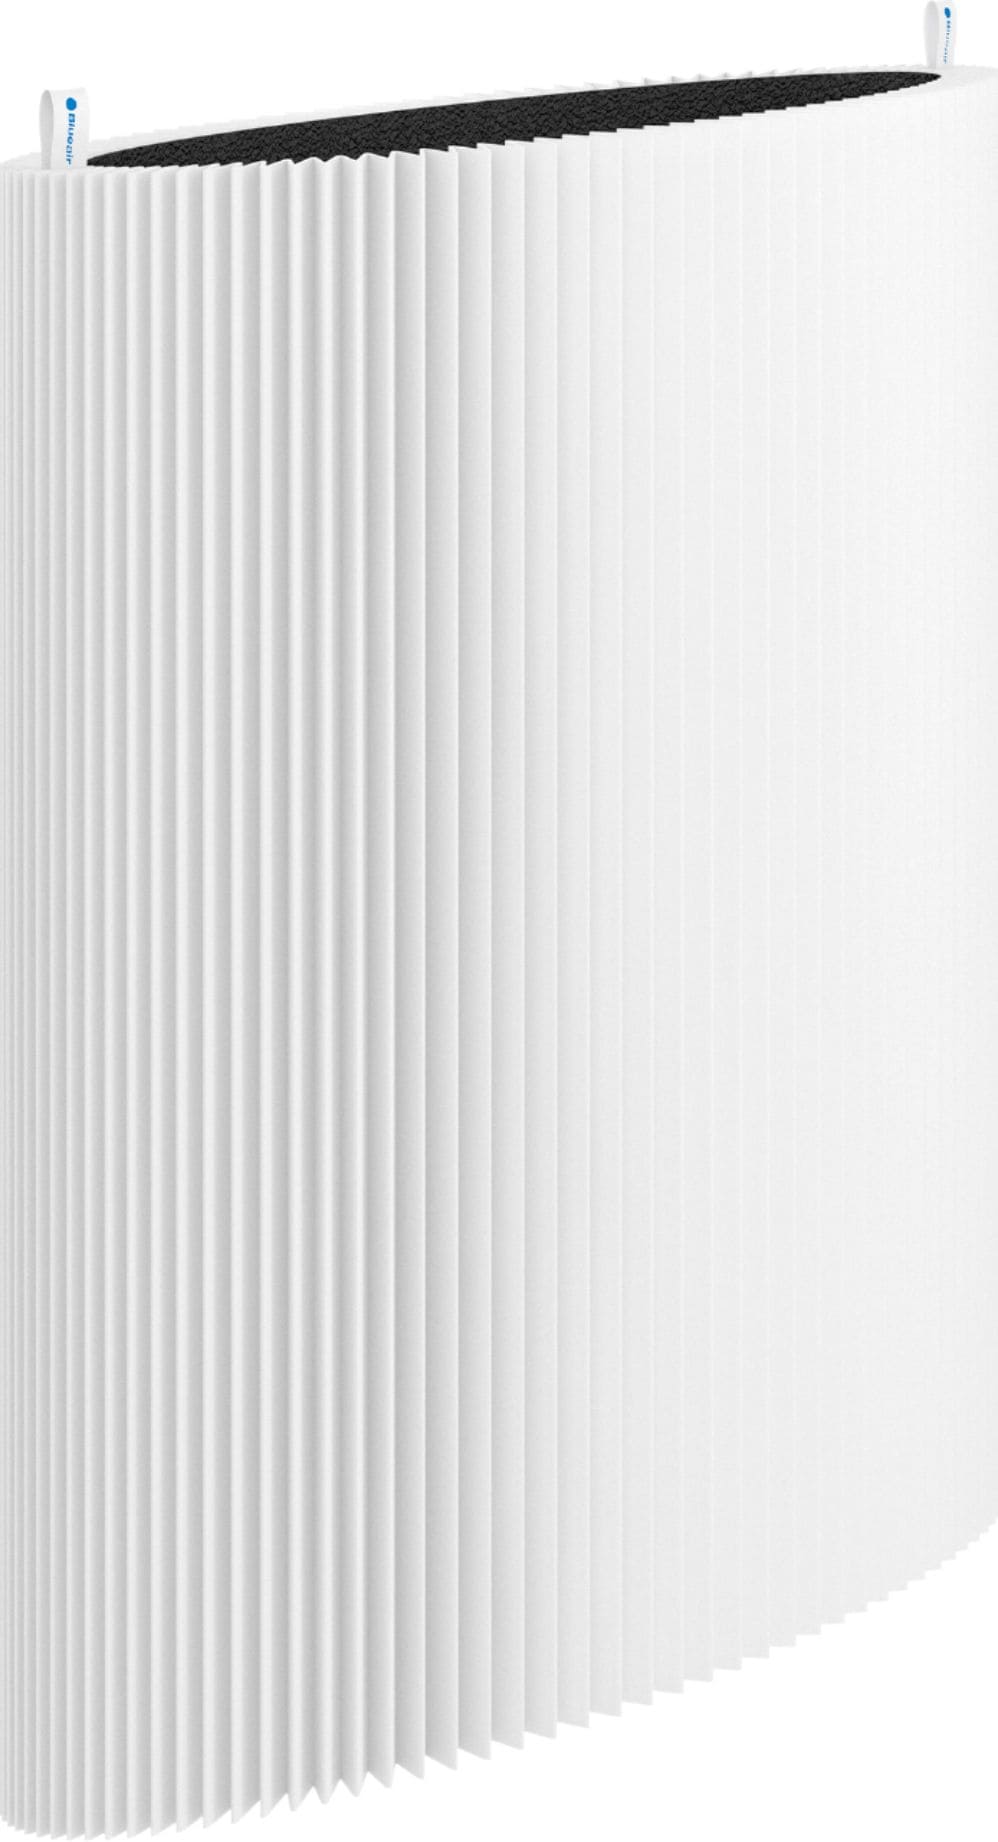 Blueair Replacement Filter for Blue Pure 411, 411+, 411 Auto Air Purifiers – Black/White - White_1